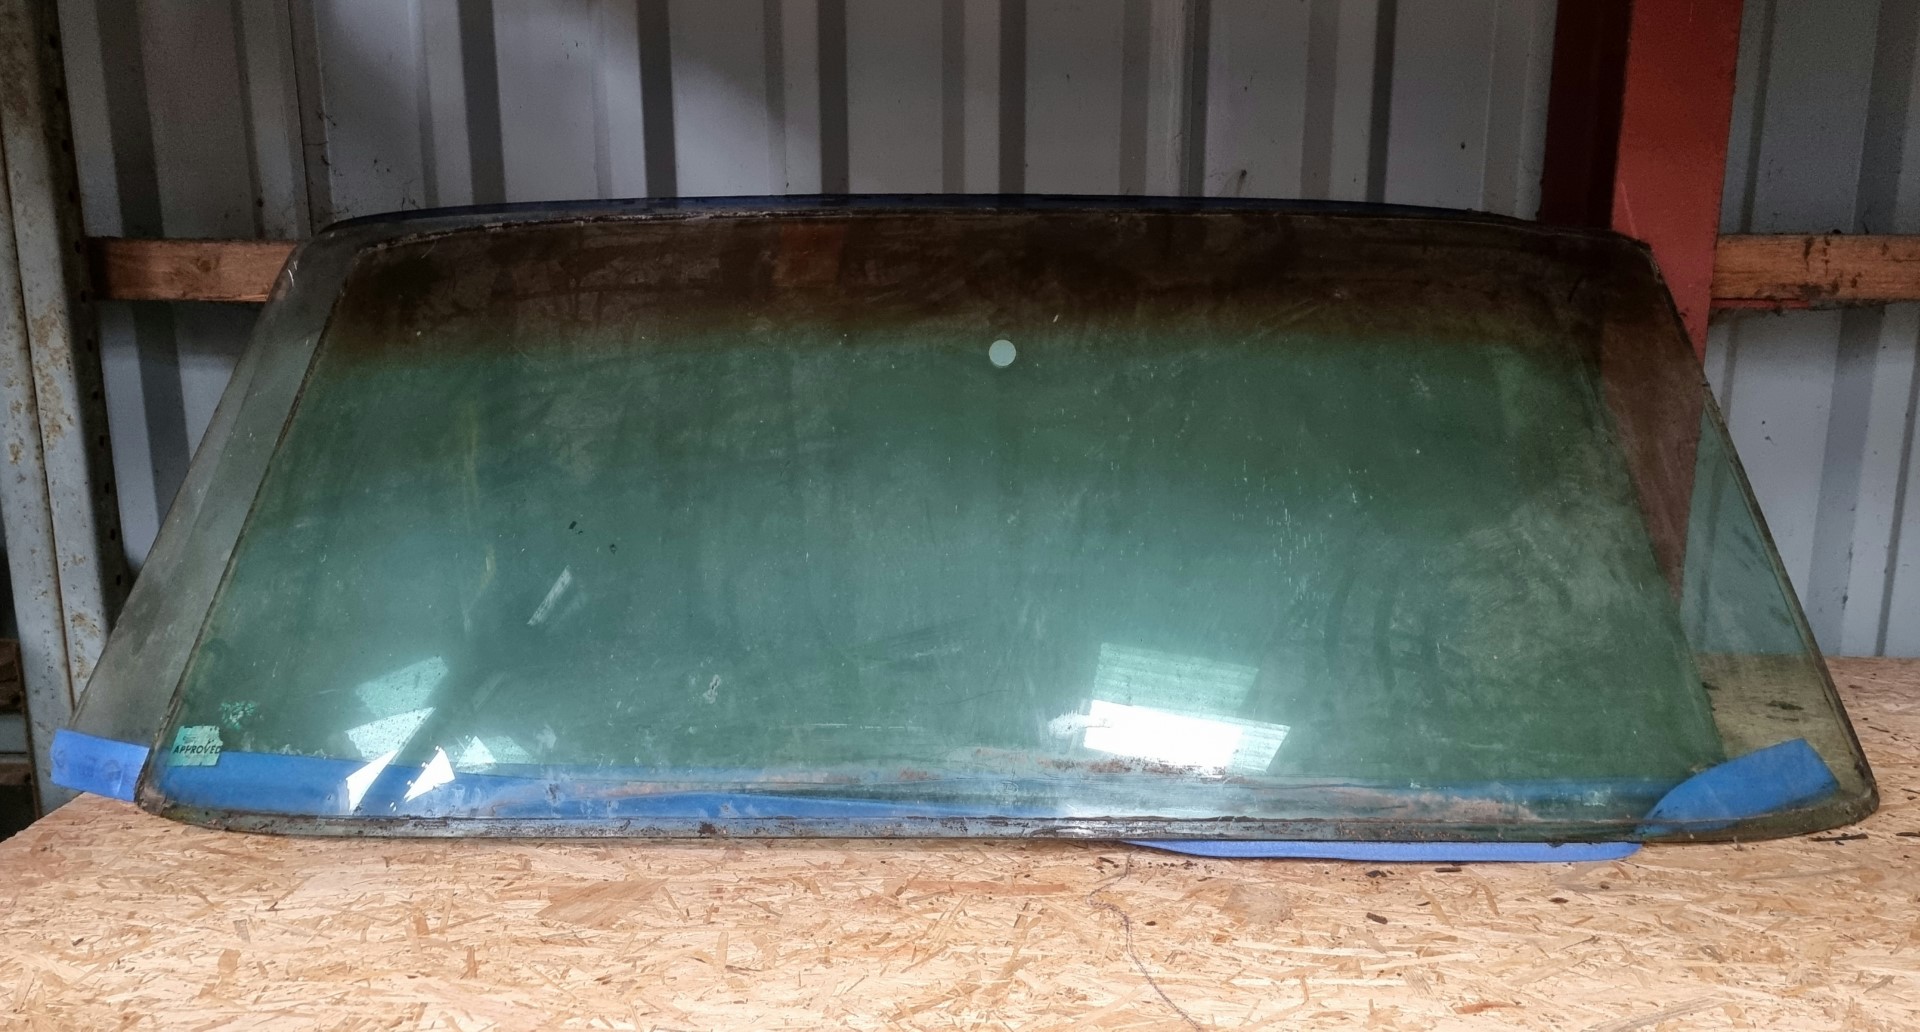 1964 - 1966 Ford Thunderbird windshield (used) several available in good condition 